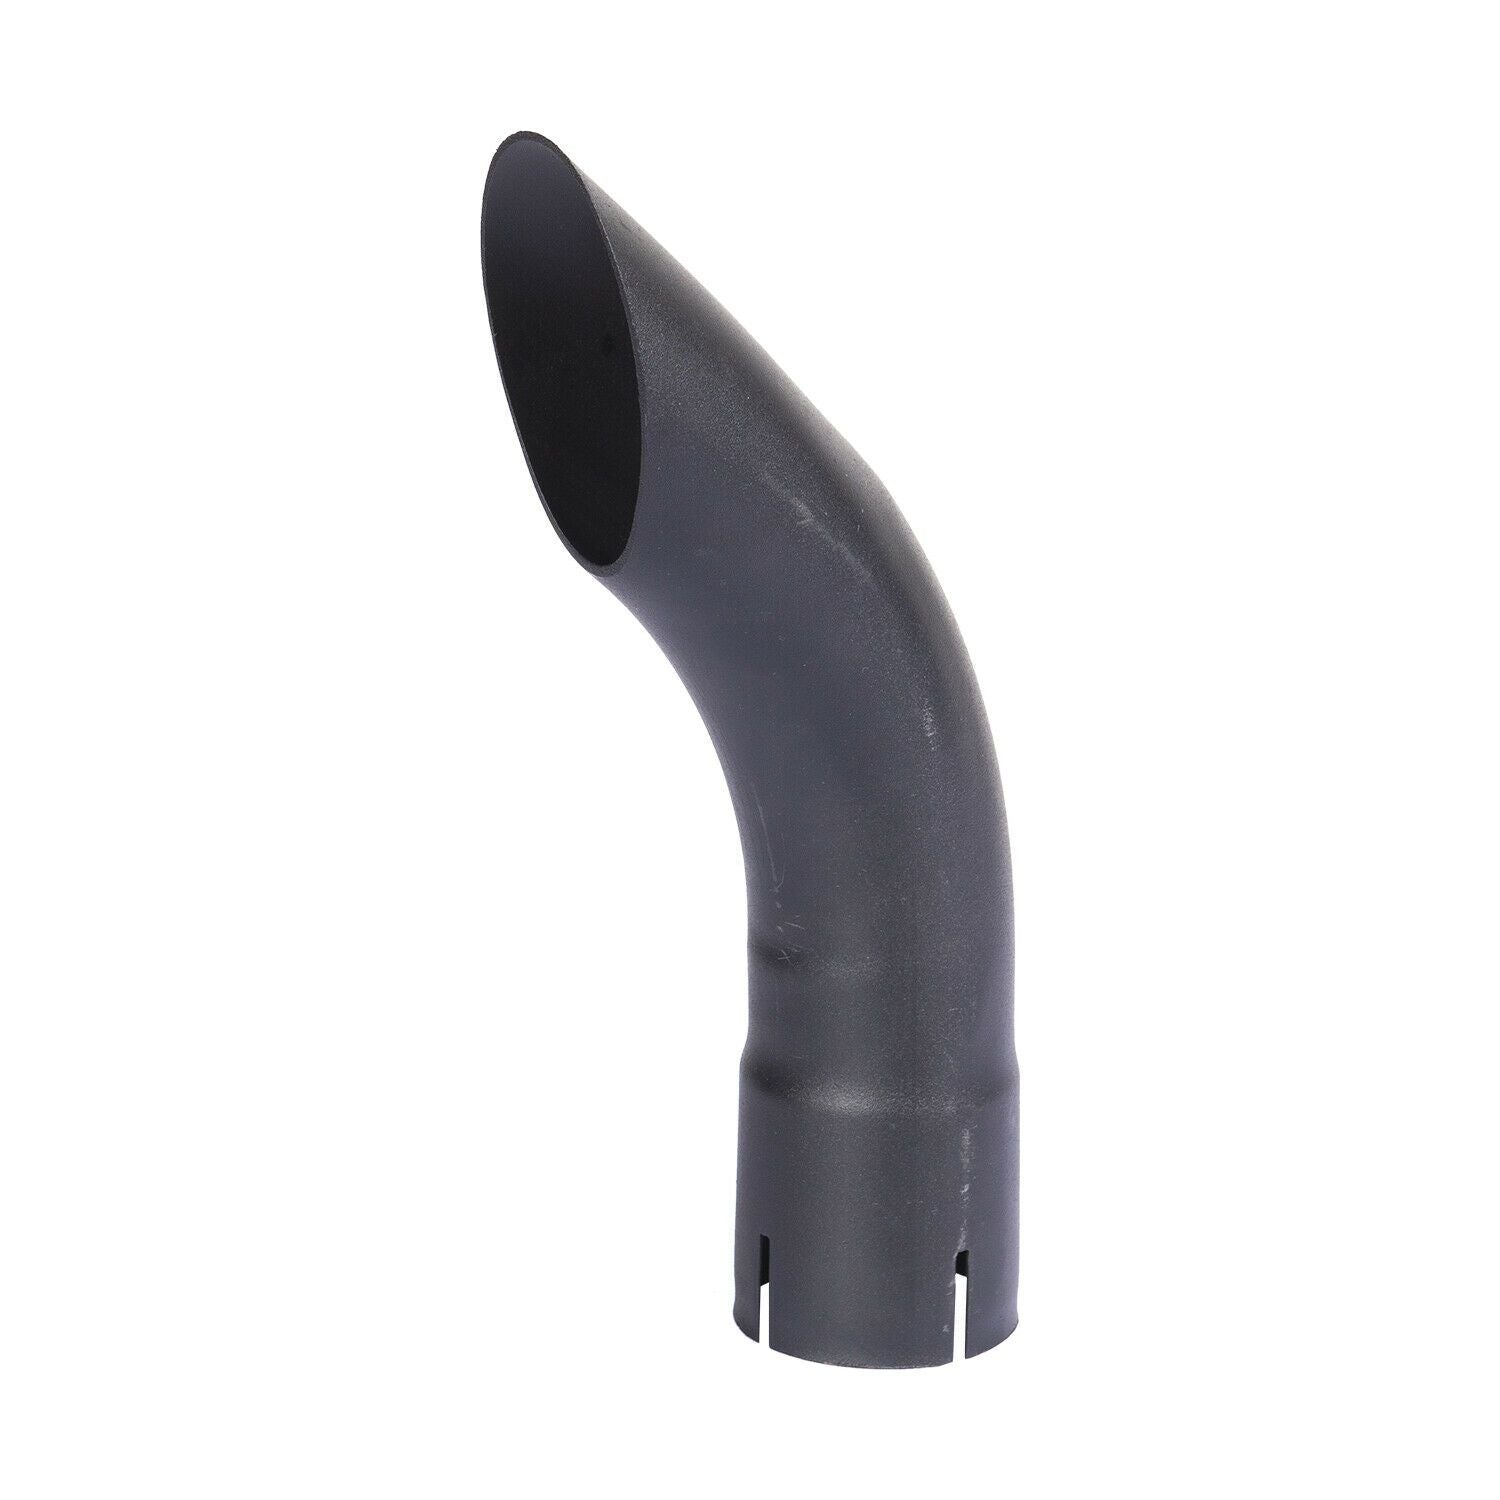 Exhaust Pipe Replacement For Exhaust Stack - 2-1/2" x 12" Curved Black